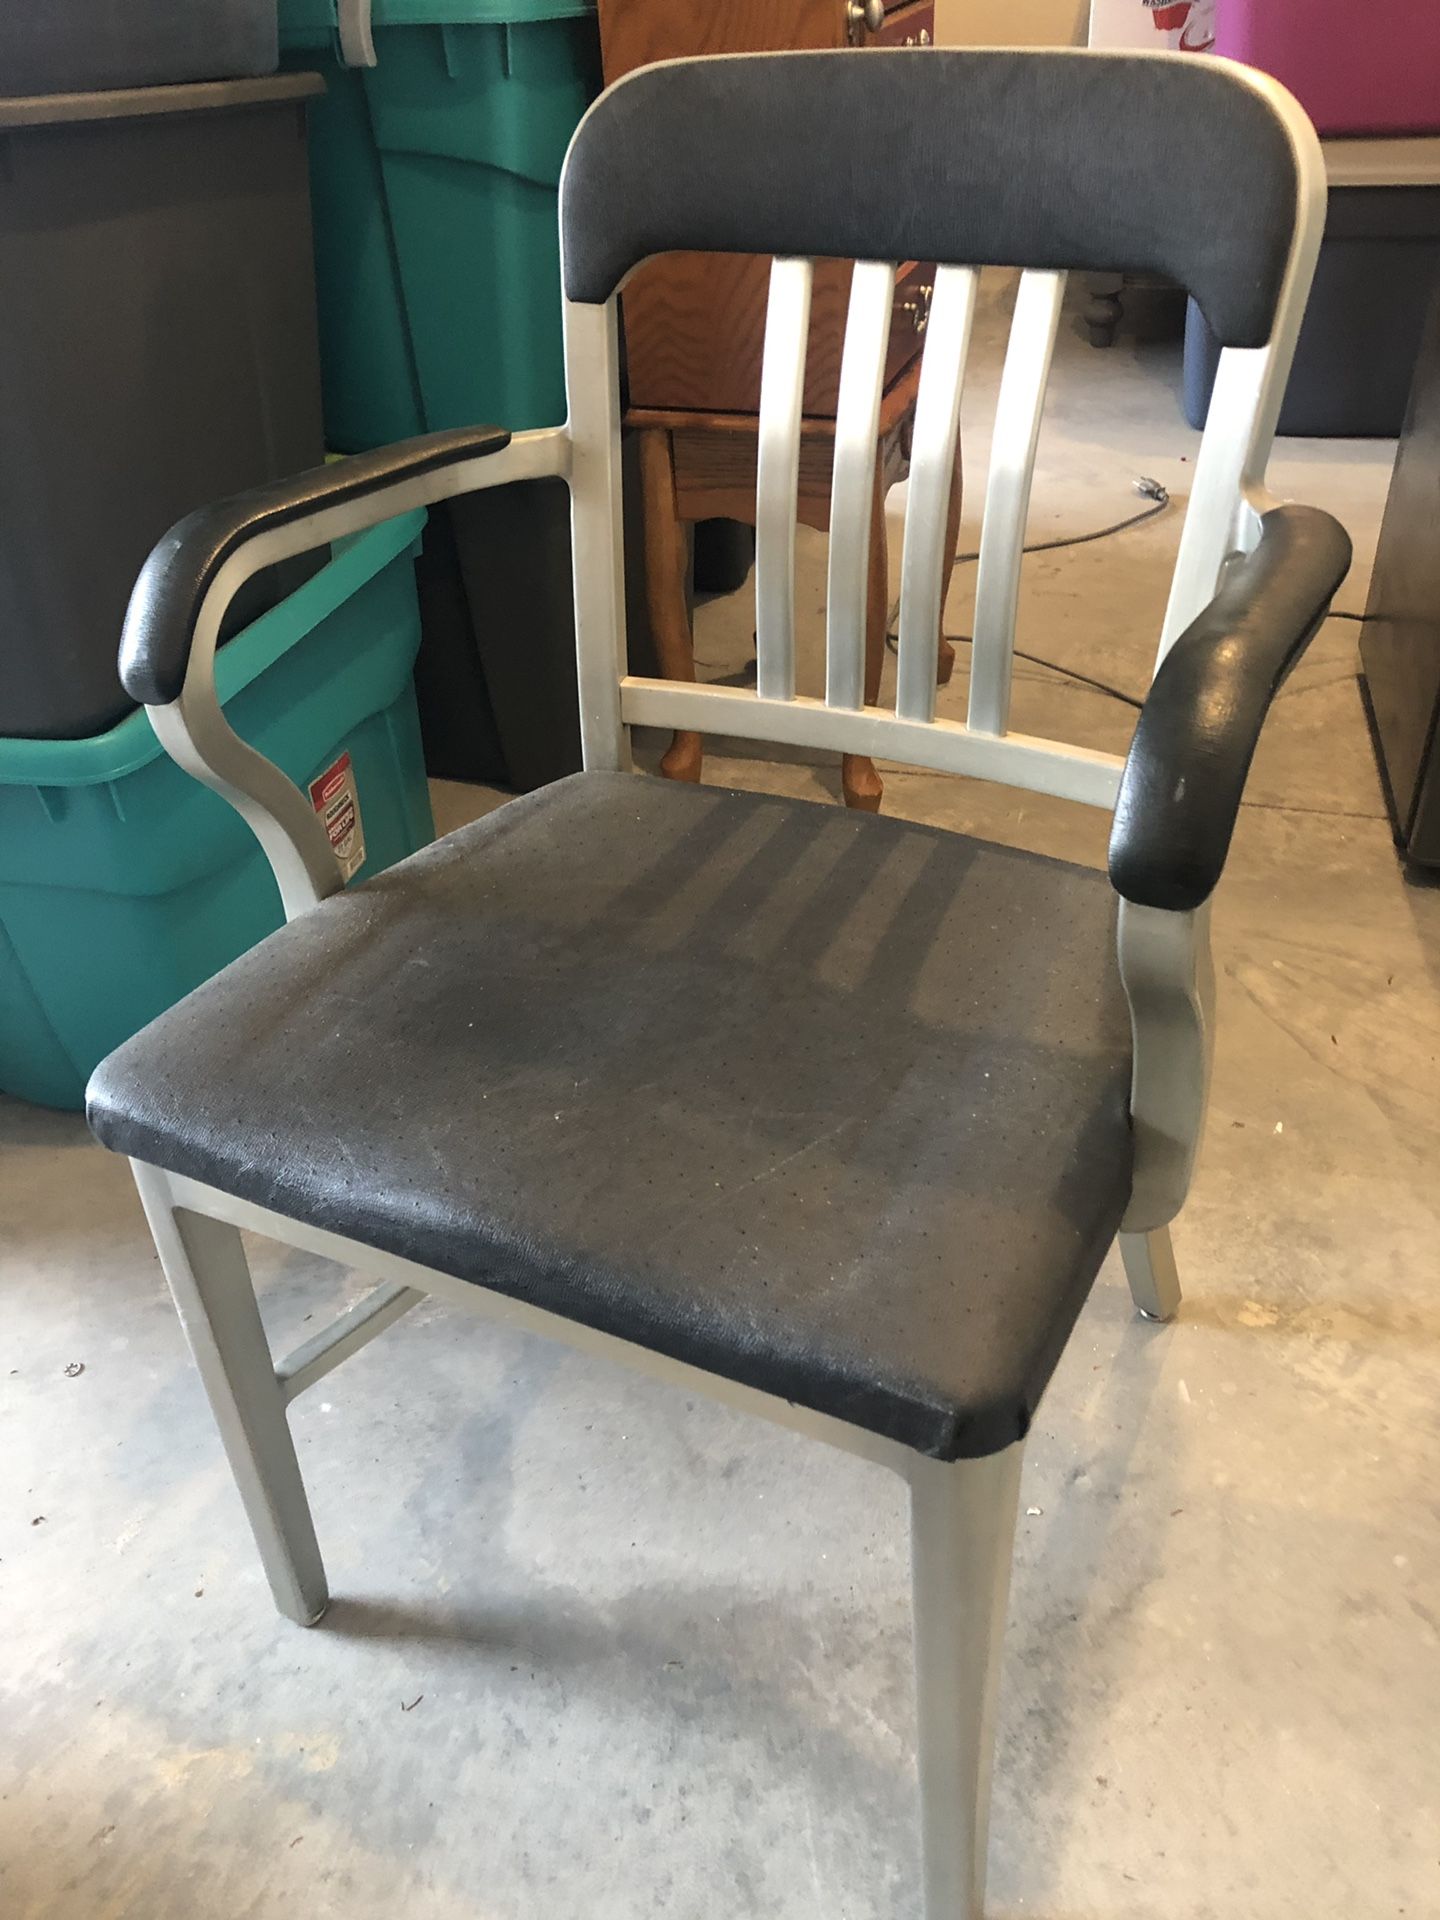 Goodform mid century arm chair, general fireproofing 50s , aluminum.